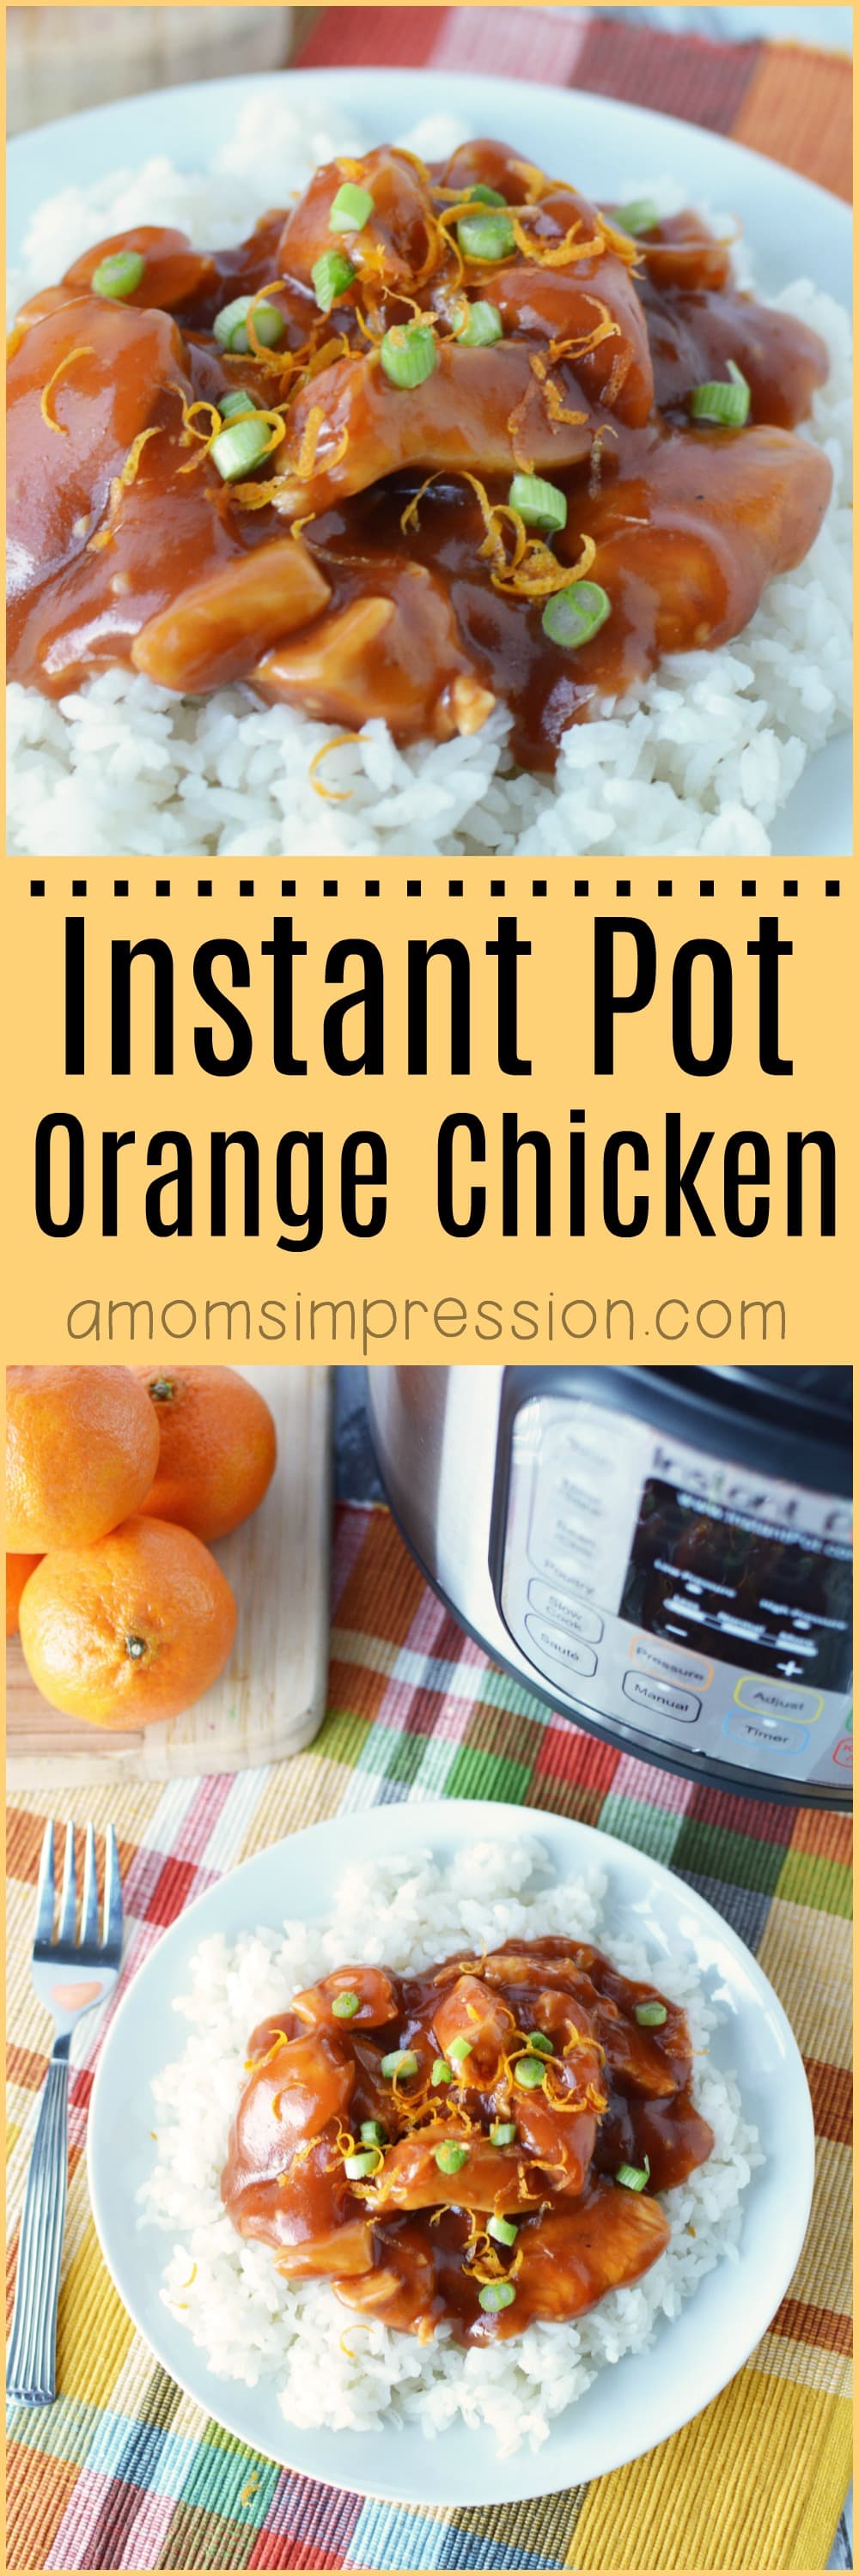 Instant Pot Orange Chicken Looking for the best orange chicken recipe? This version is super easy with crispy chicken and the most delicious sauce you have ever had! While this is an Instant Pot / Pressure Cooker recipe there are also instructions for your slow cooker. #orangechicken #InstantPotRecipe